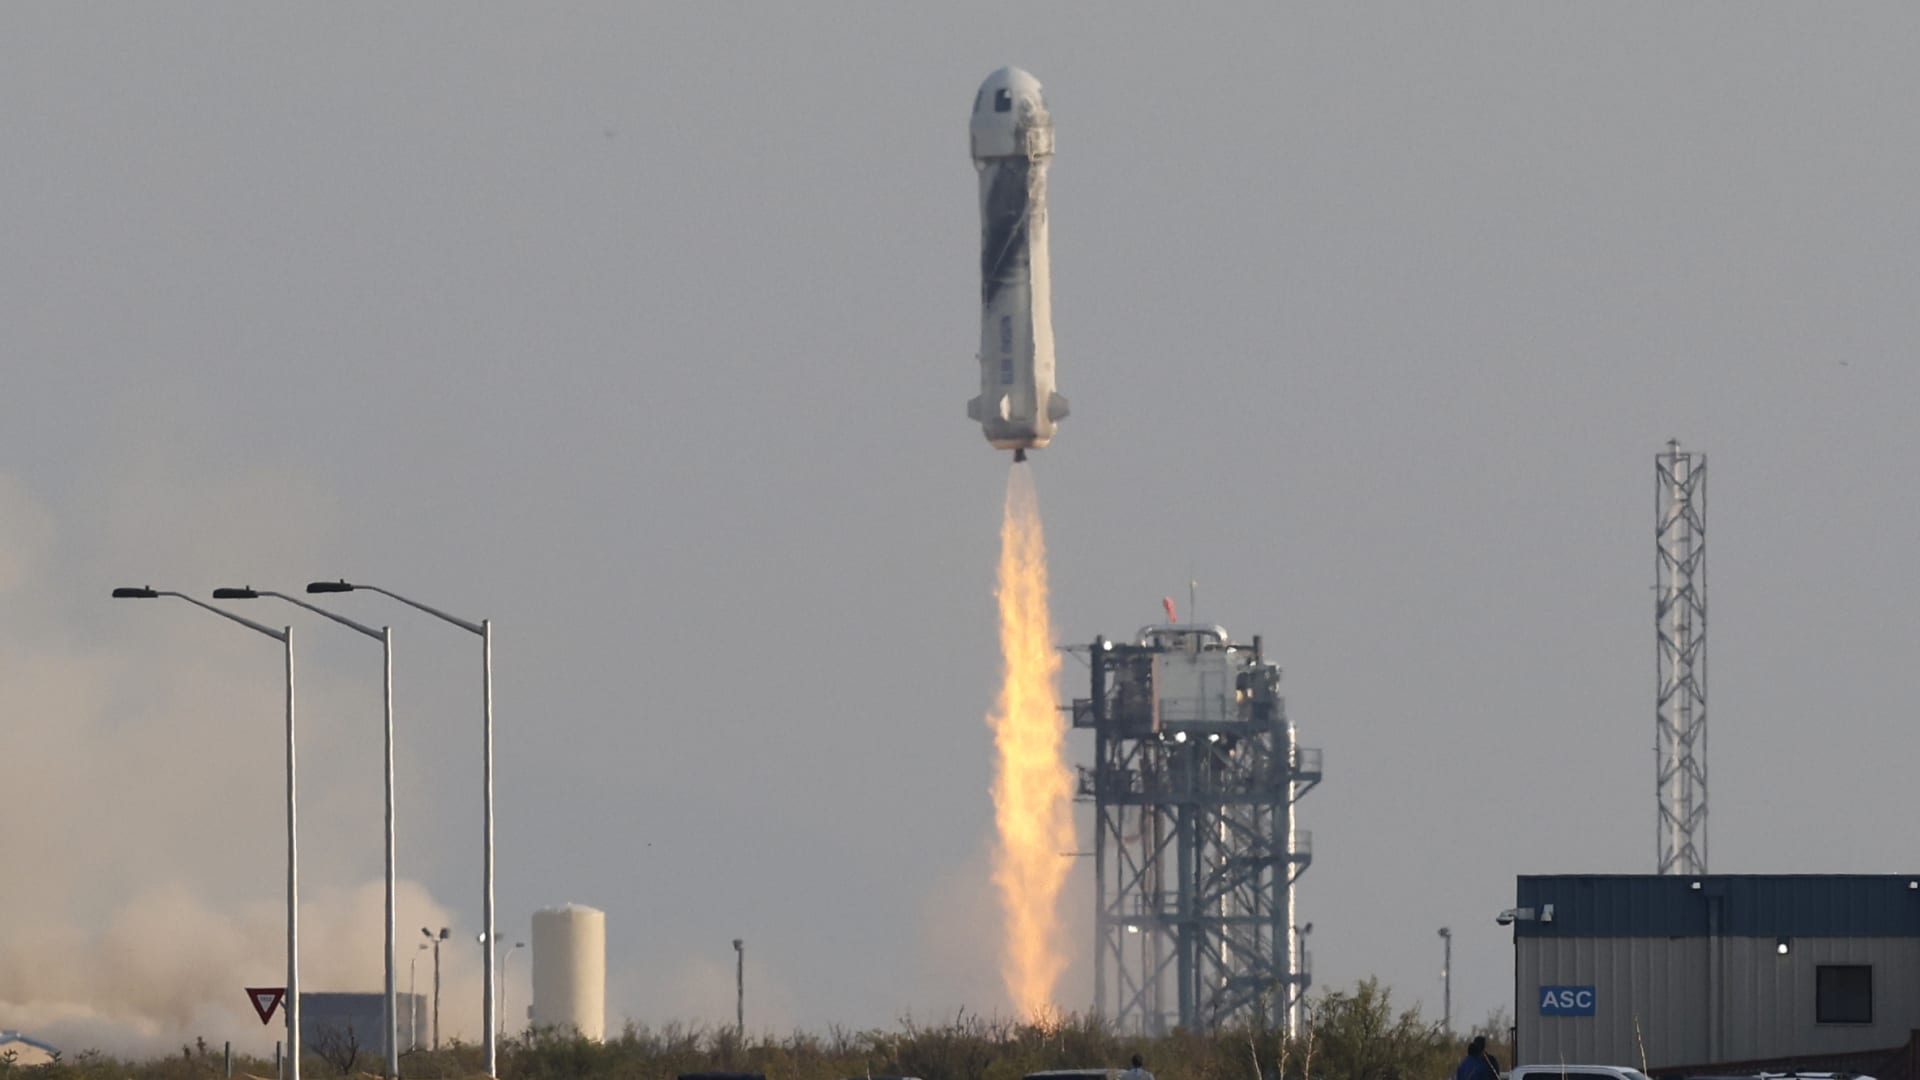 Billionaire businessman Jeff Bezos is launched with three crew members aboard a New Shepard rocket on the world's first unpiloted suborbital flight from Blue Origin's Launch Site 1 near Van Horn, Texas, July 20, 2021.